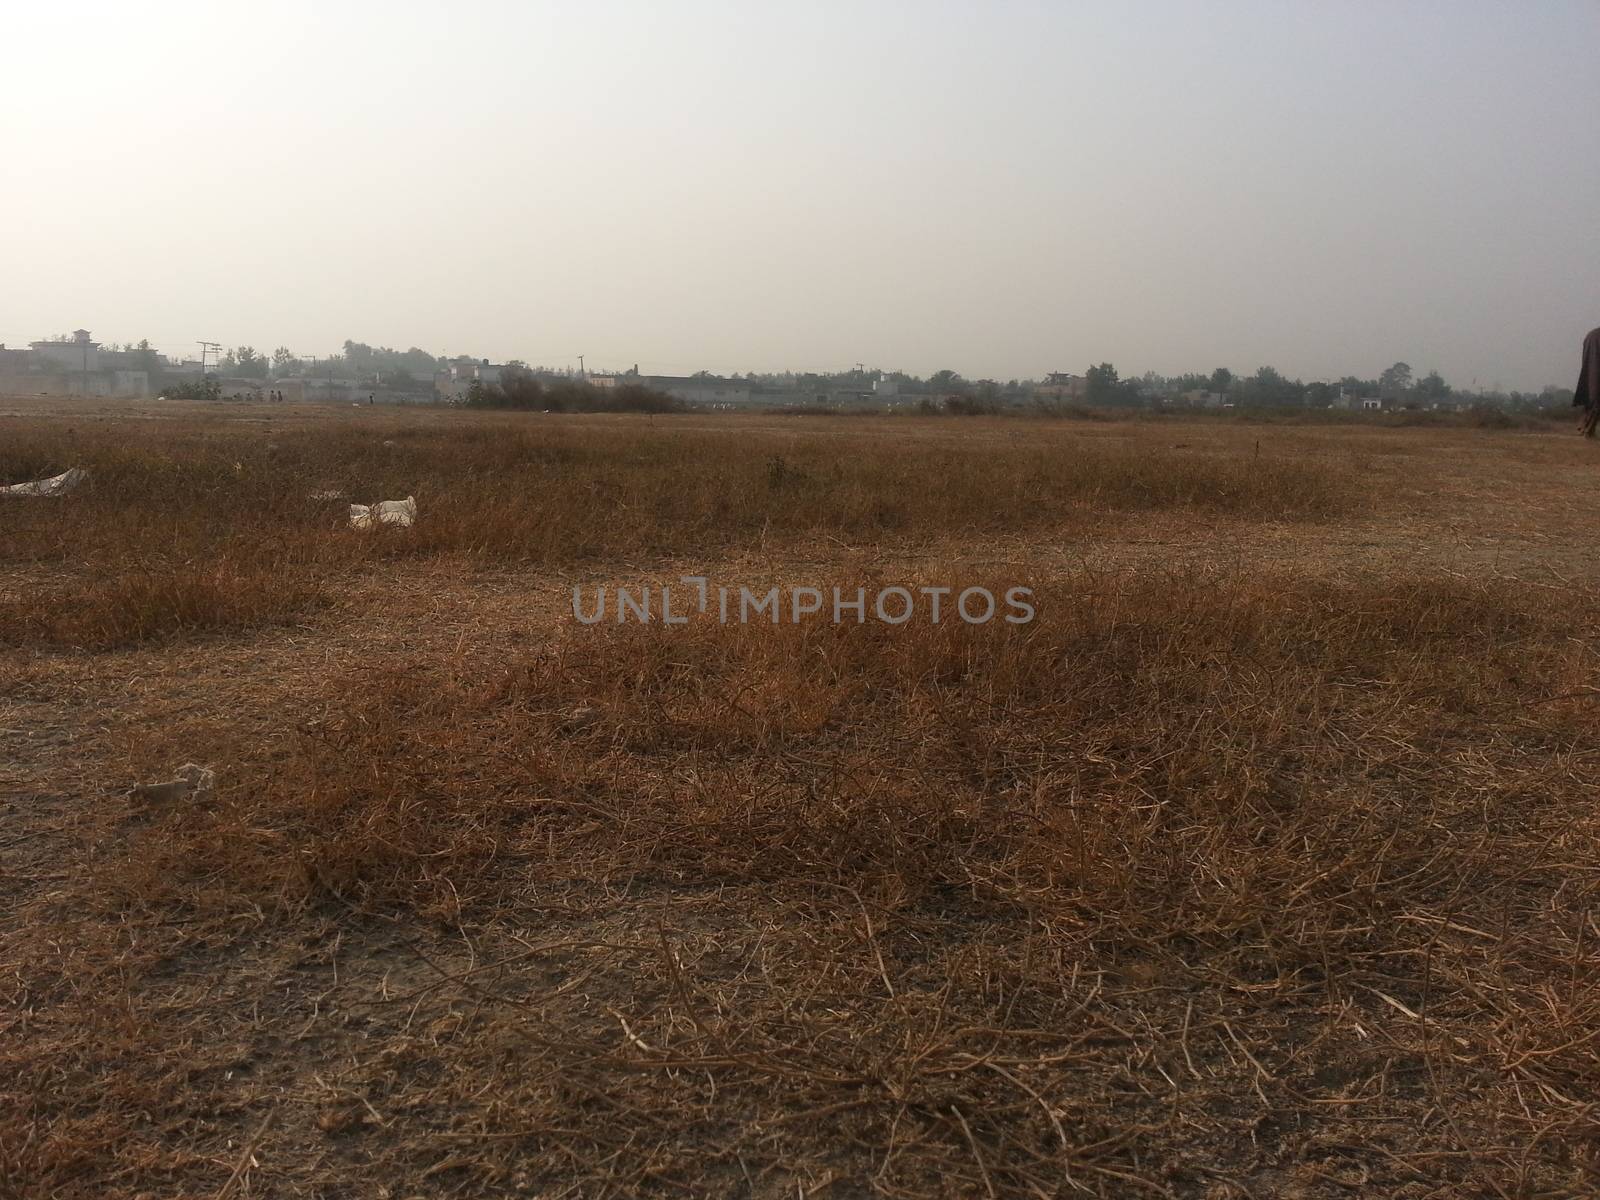 Arid brown grassland view of a rural land in hot weather on sunny day by Photochowk